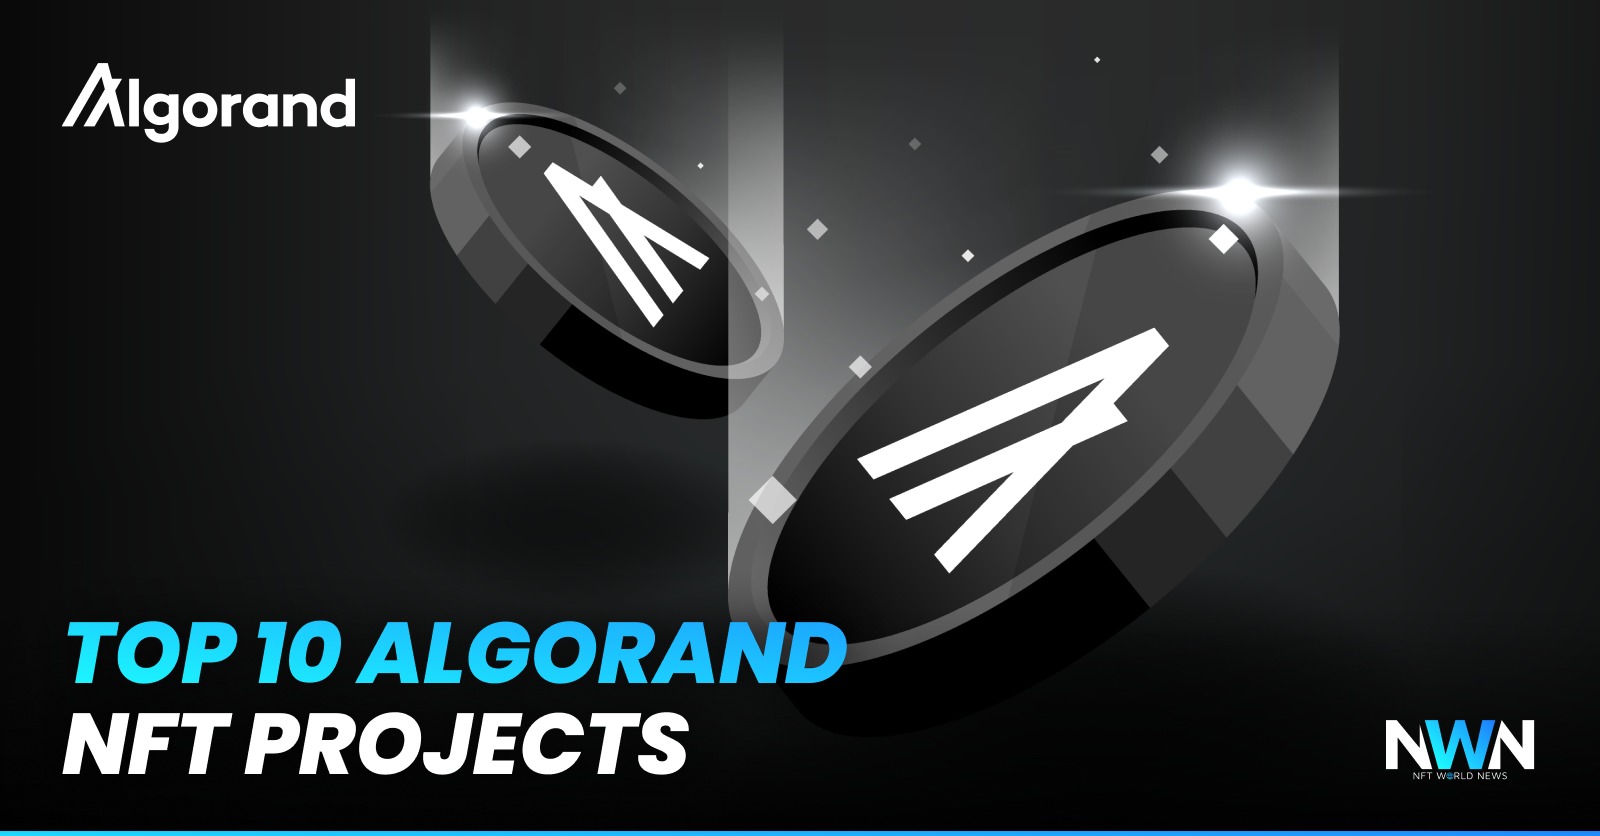 Top 10 Algorand NFT Projects In Summer 2022